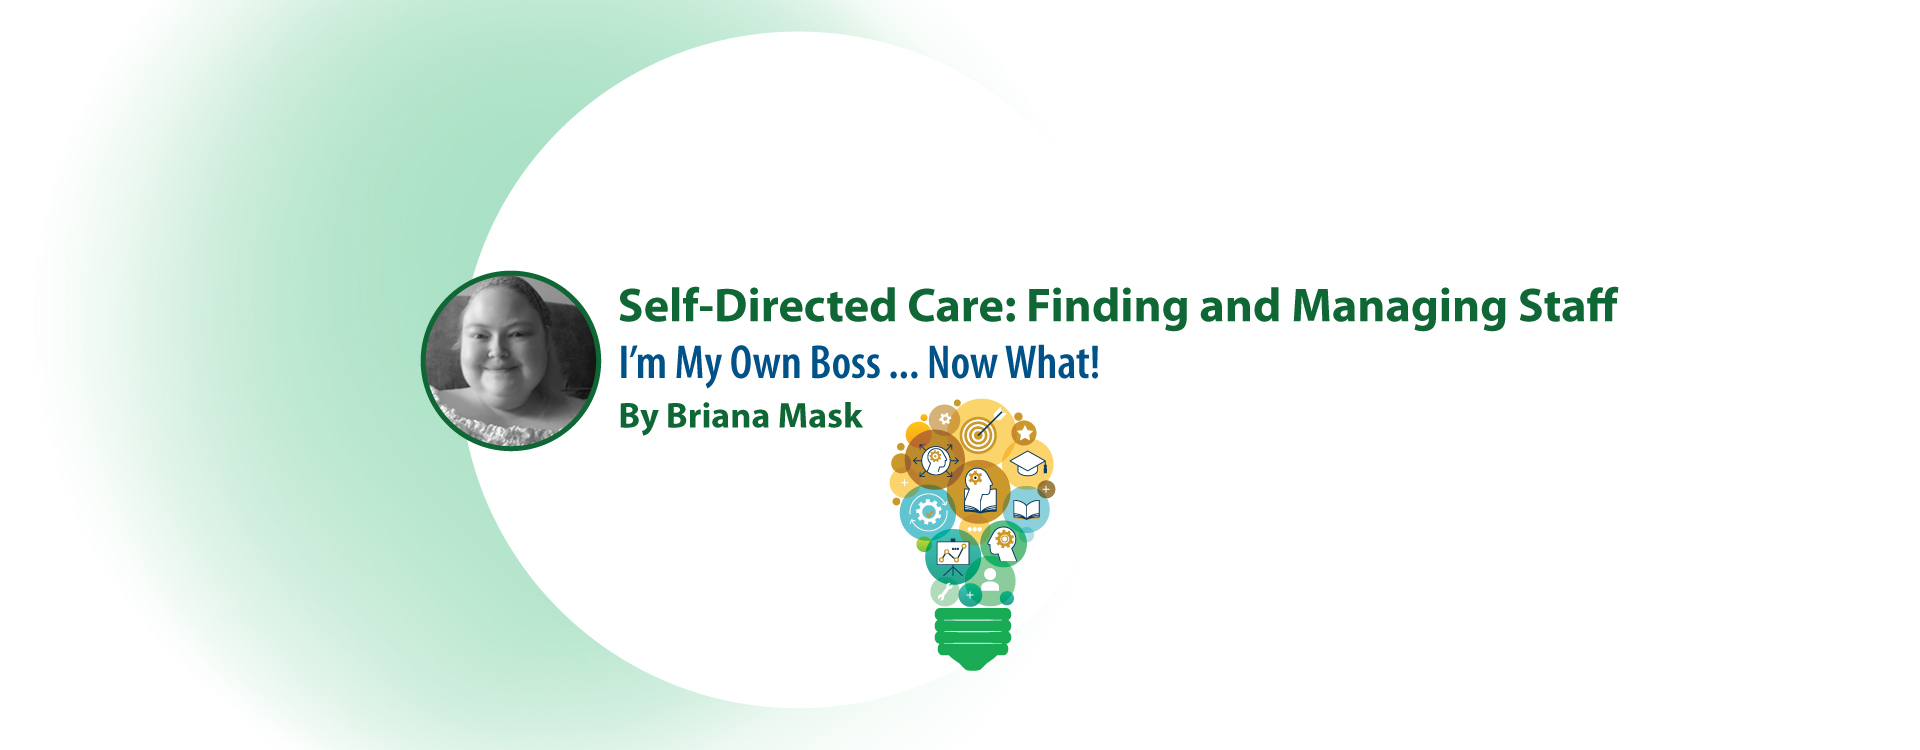 Featured image for “Self-Directed Care: Finding and Managing Staff”